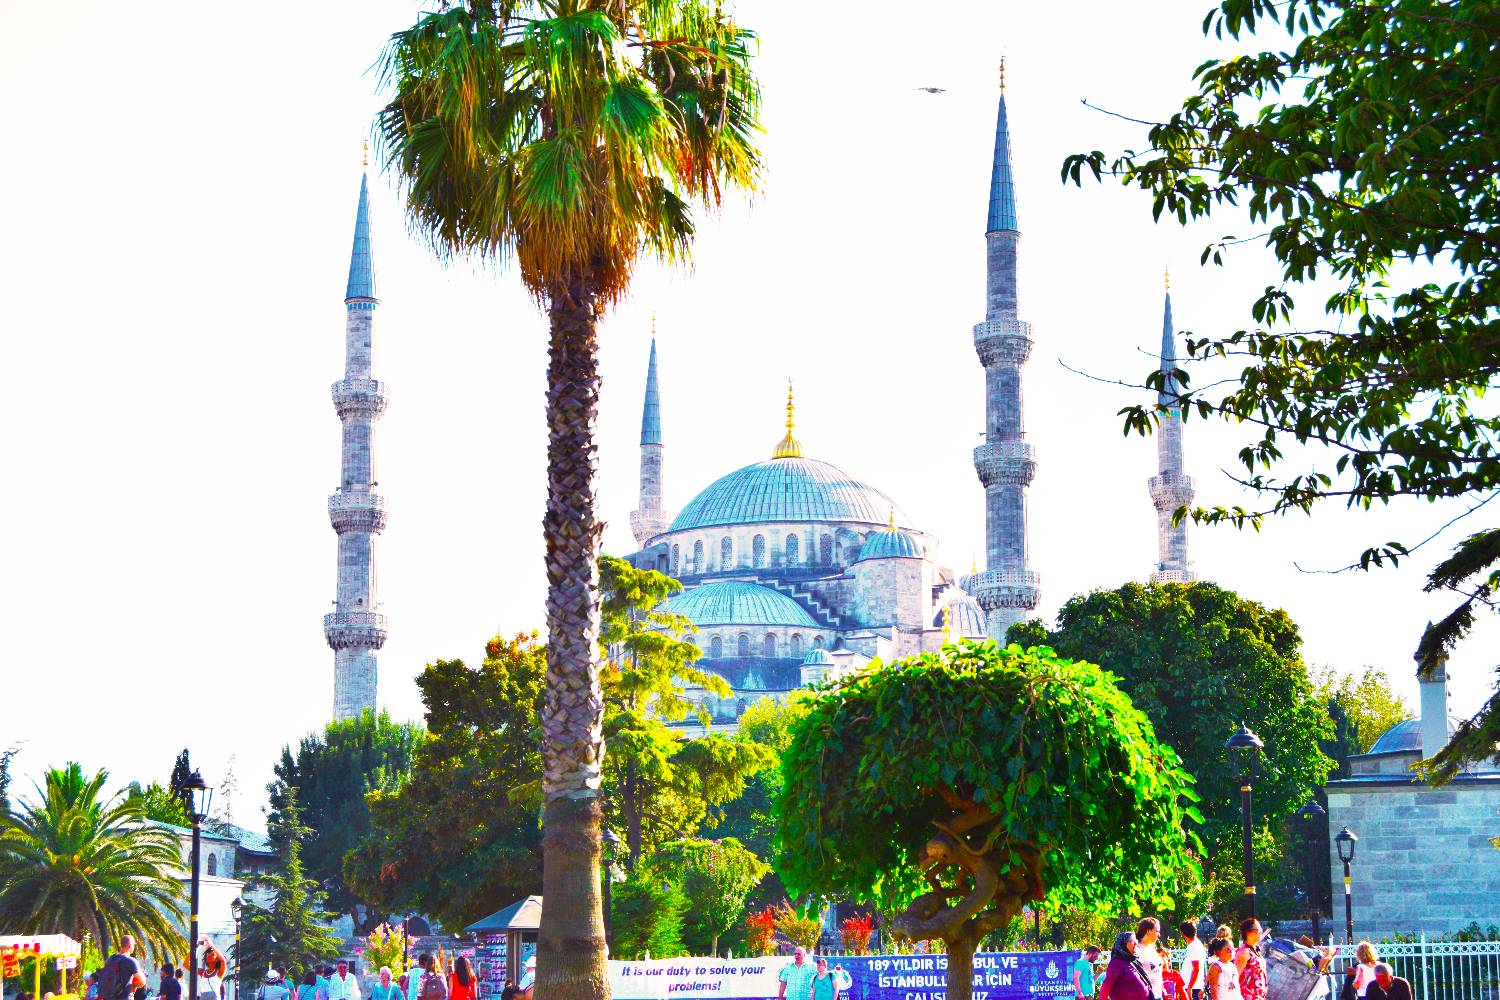 the-ultimate-one-week-istanbul-itinerary-and-guide-sultanahmet-square-istanbul-turkey-0471361001500722845